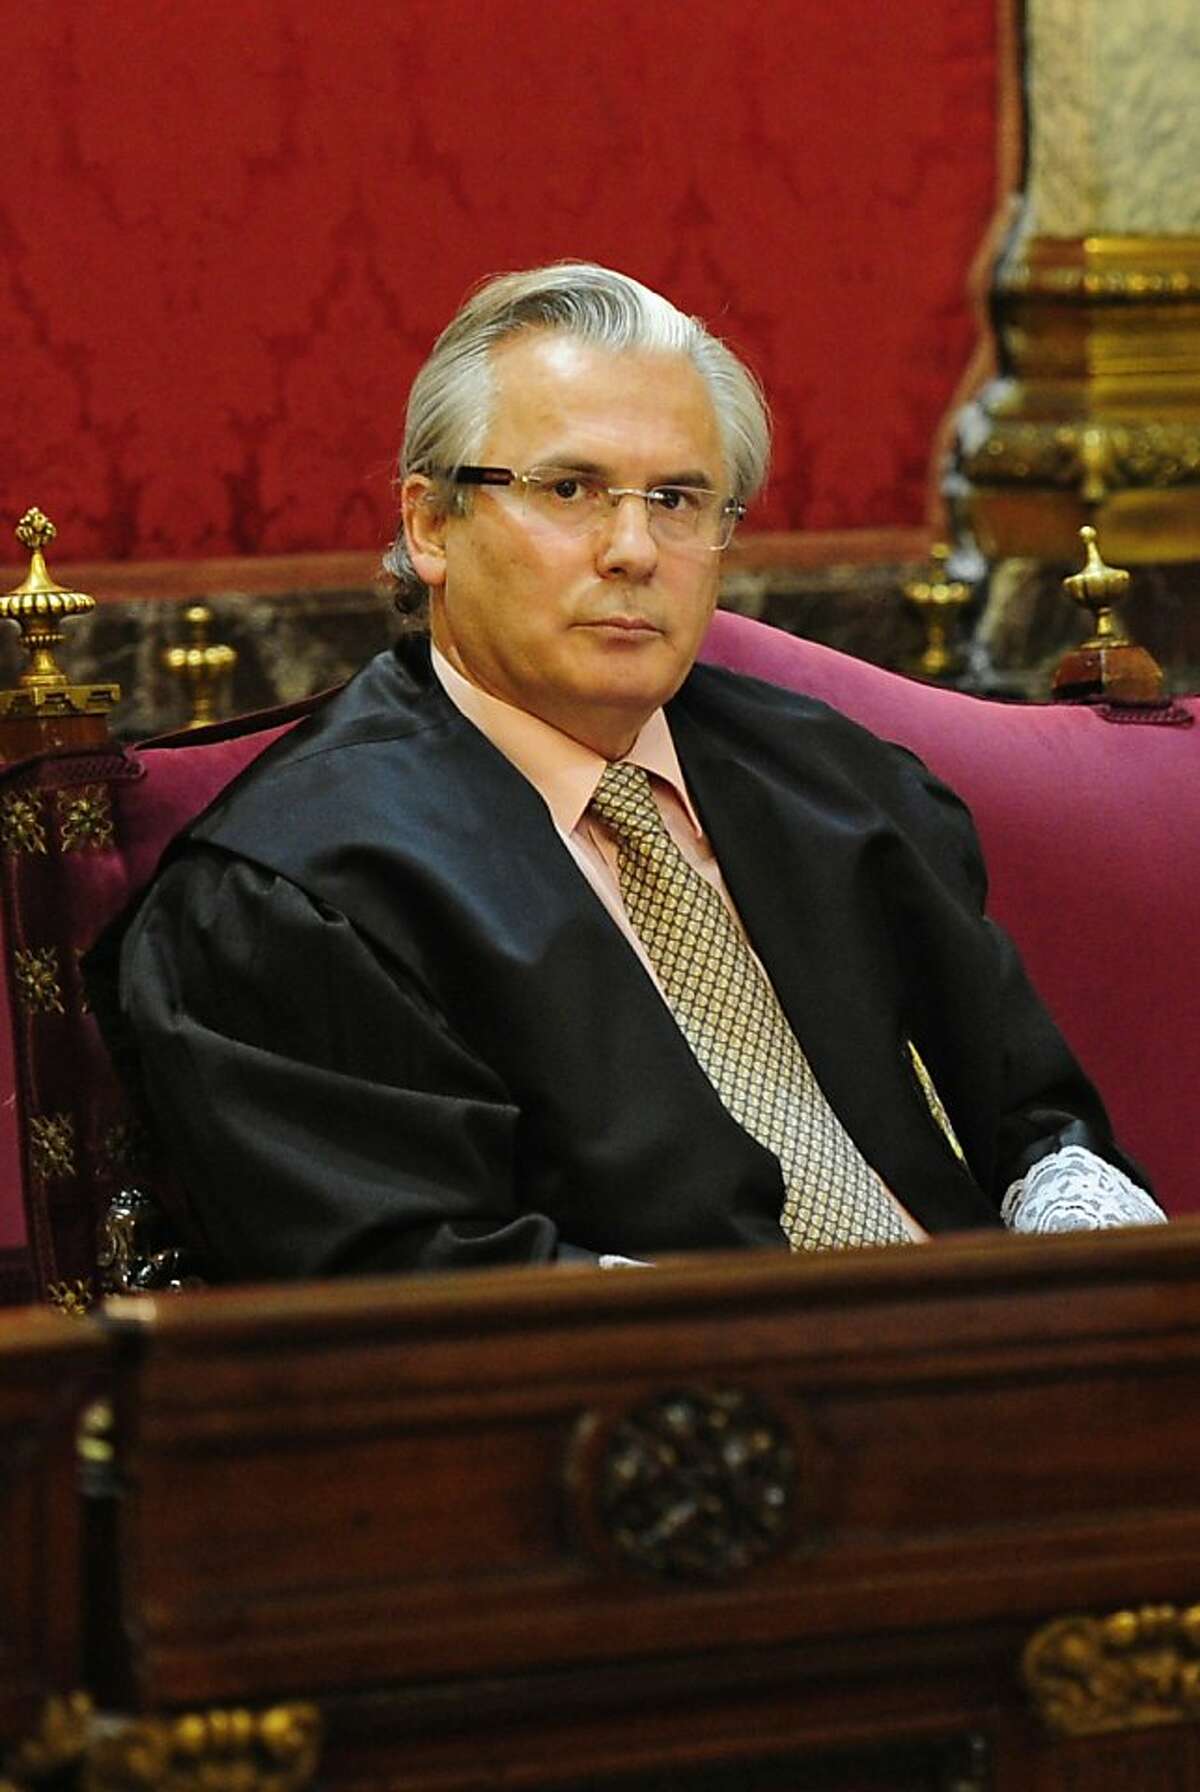 This file picture dated January 17, 2012 shows Spanish judge Baltasar Garzon attending the first day of his trial on charges for abuse of power over alleged illegal wiretapping at Spain's Supreme court in Madrid. Spain's high court convicted top judge Baltasar Garzon on February 9, 2012 in an illegal wiretapping case and suspended him from the law for 11 years, in one of two cases in which he has stood trial this year.